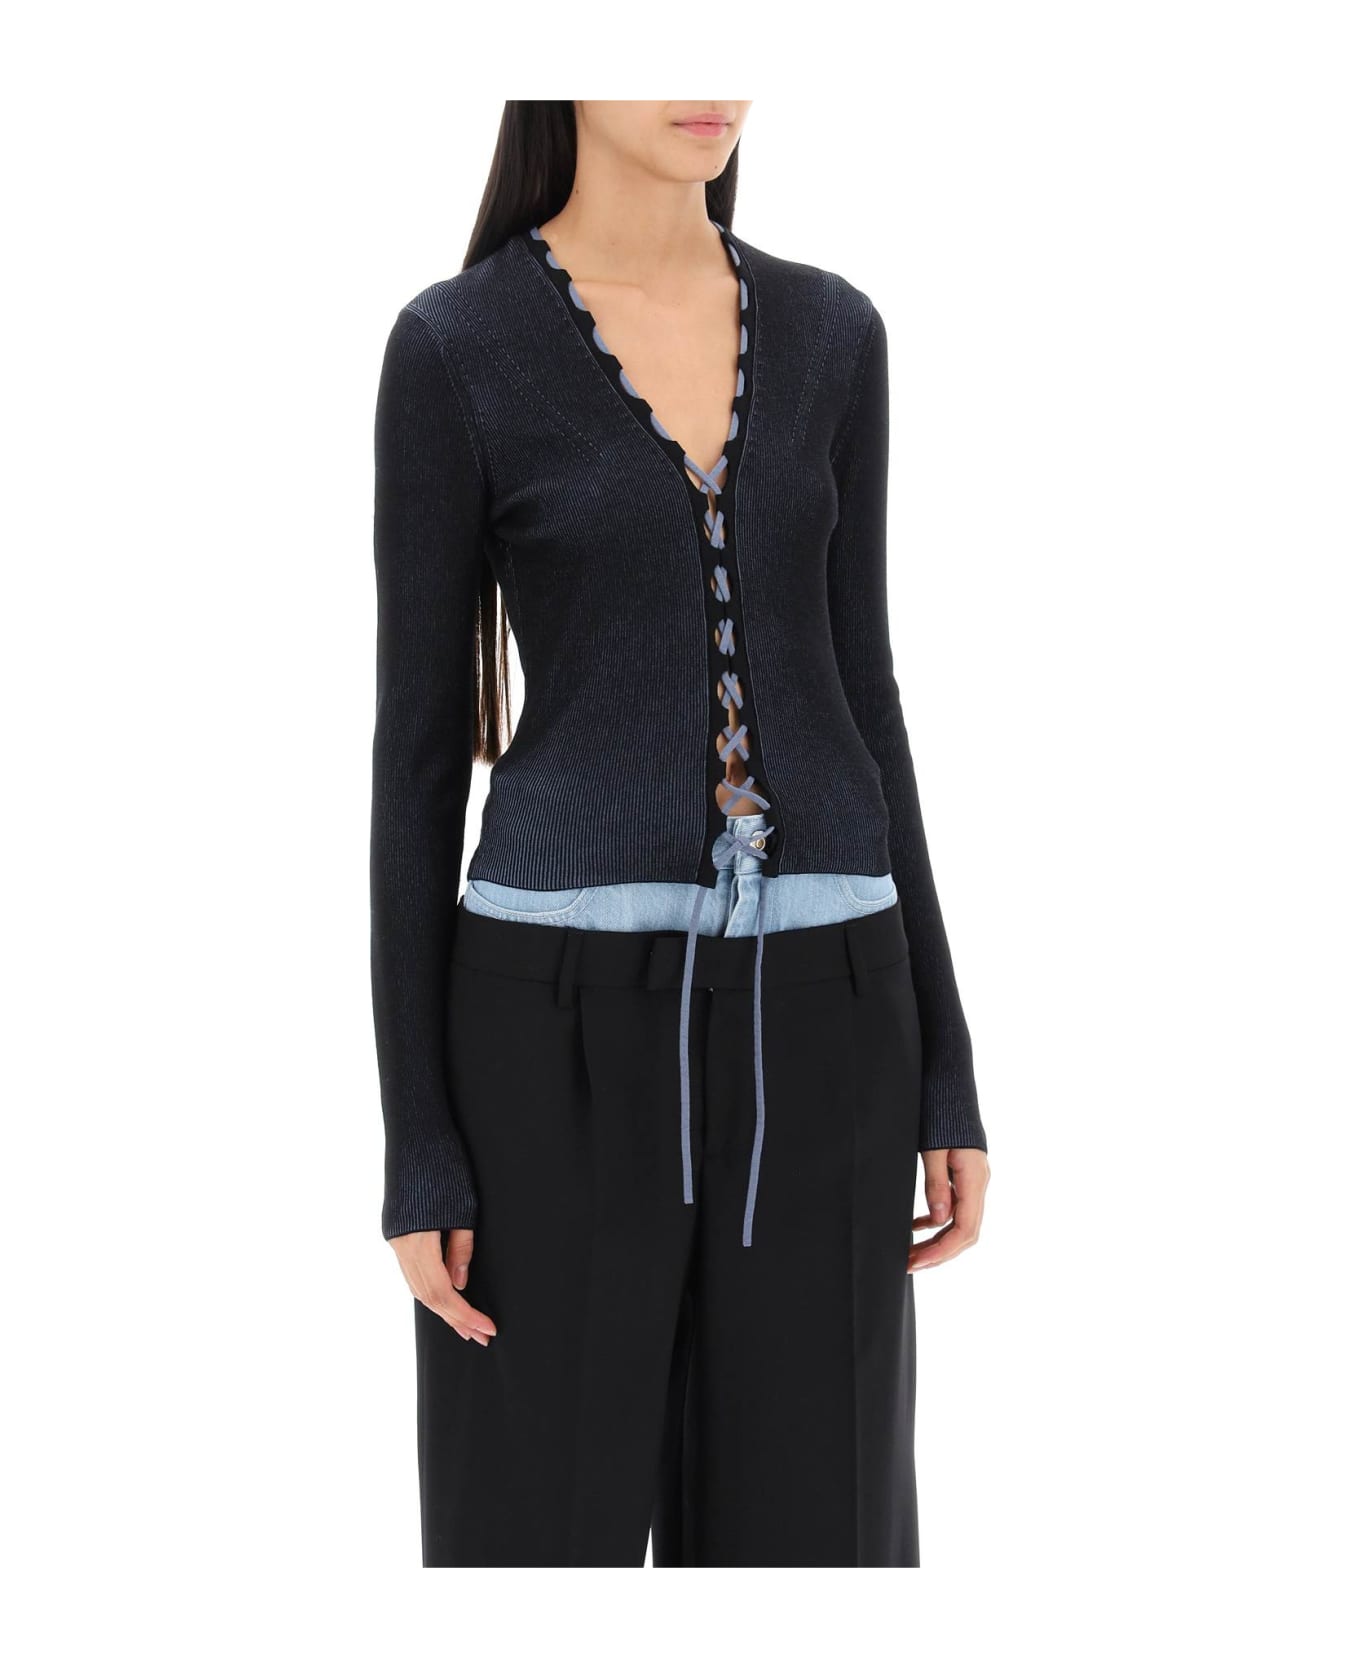 Dion Lee Two-tone Lace-up Cardigan - BLACK STORM BLUE (Black) カーディガン